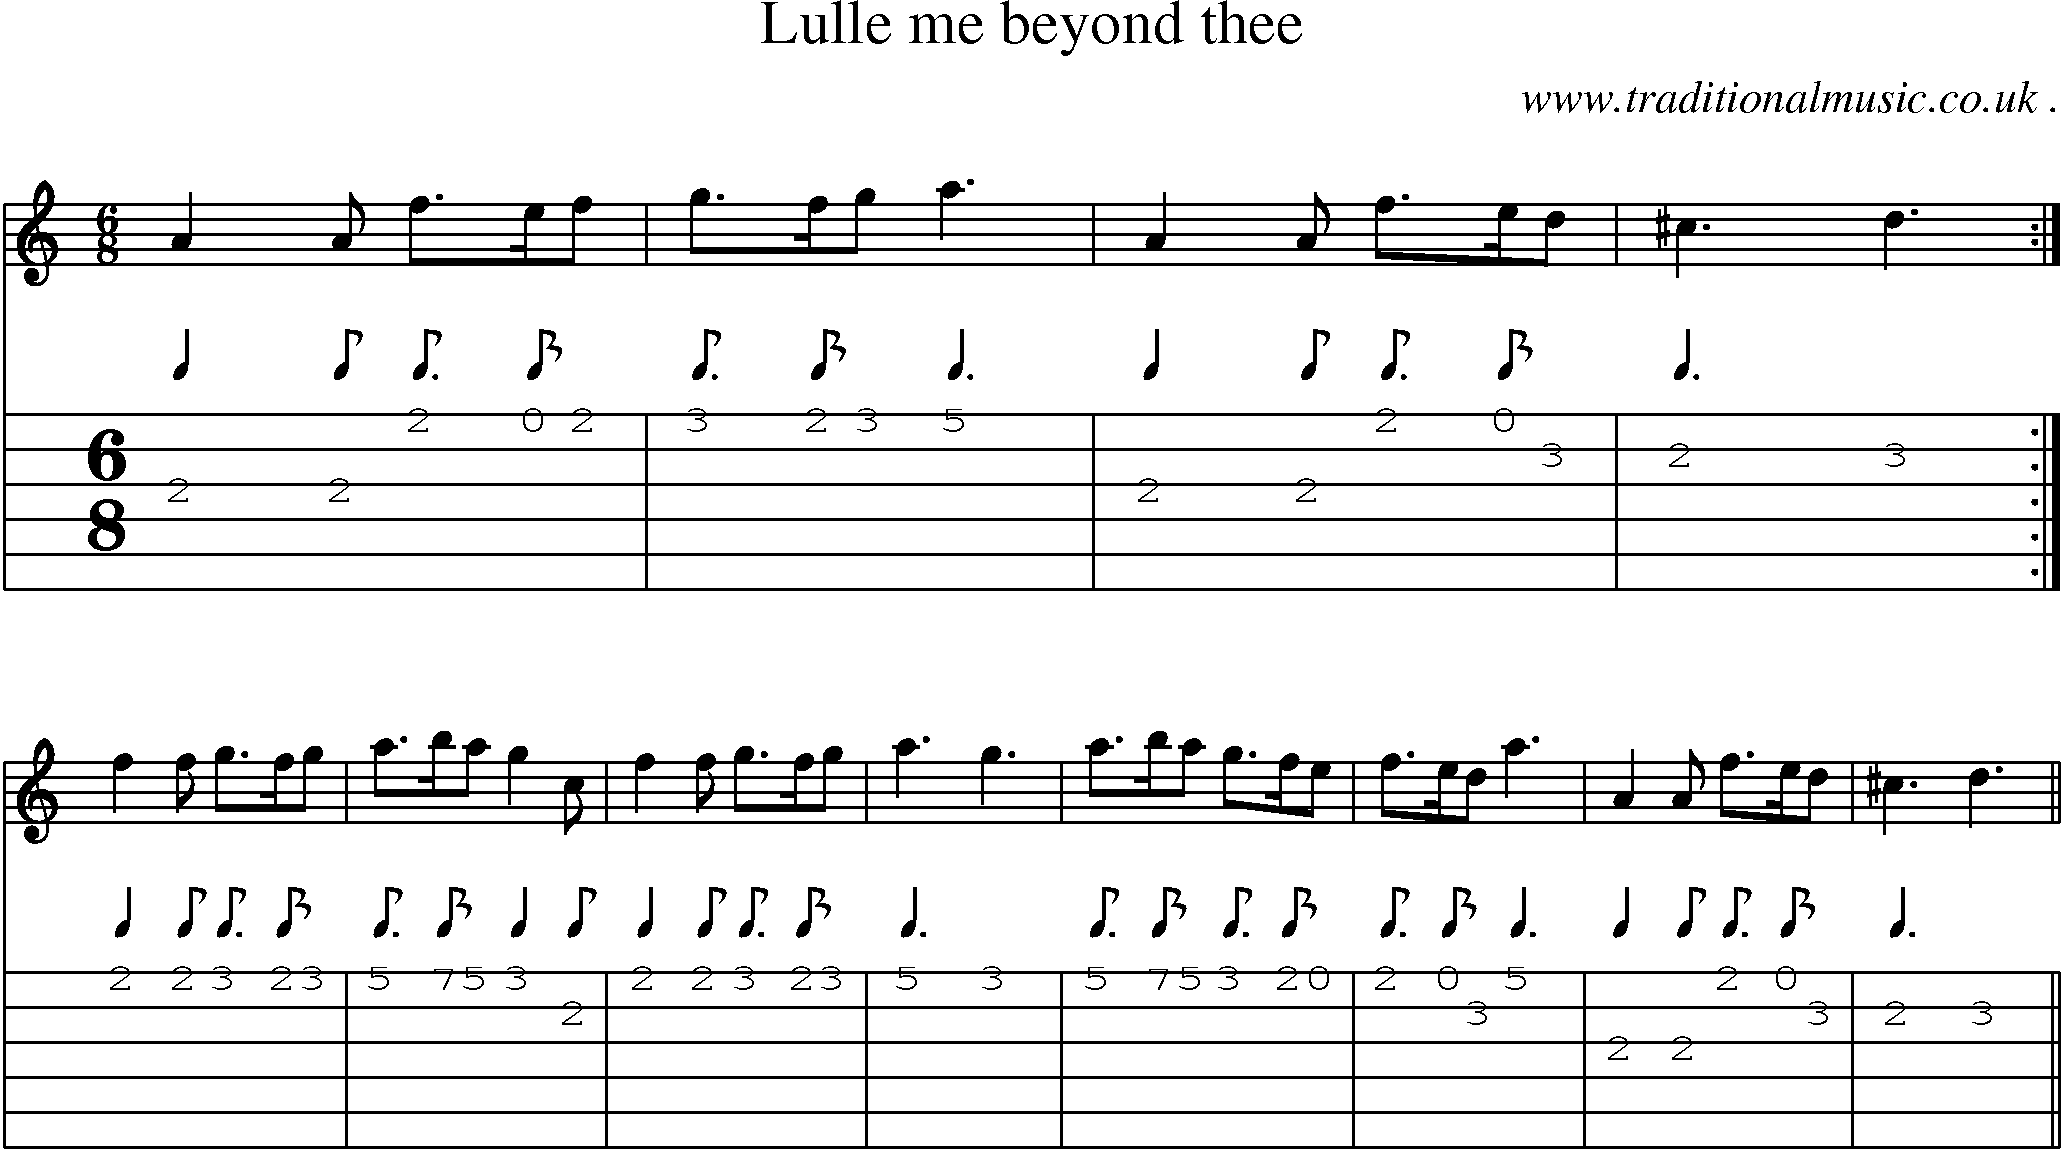 Sheet-music  score, Chords and Guitar Tabs for Lulle Me Beyond Thee